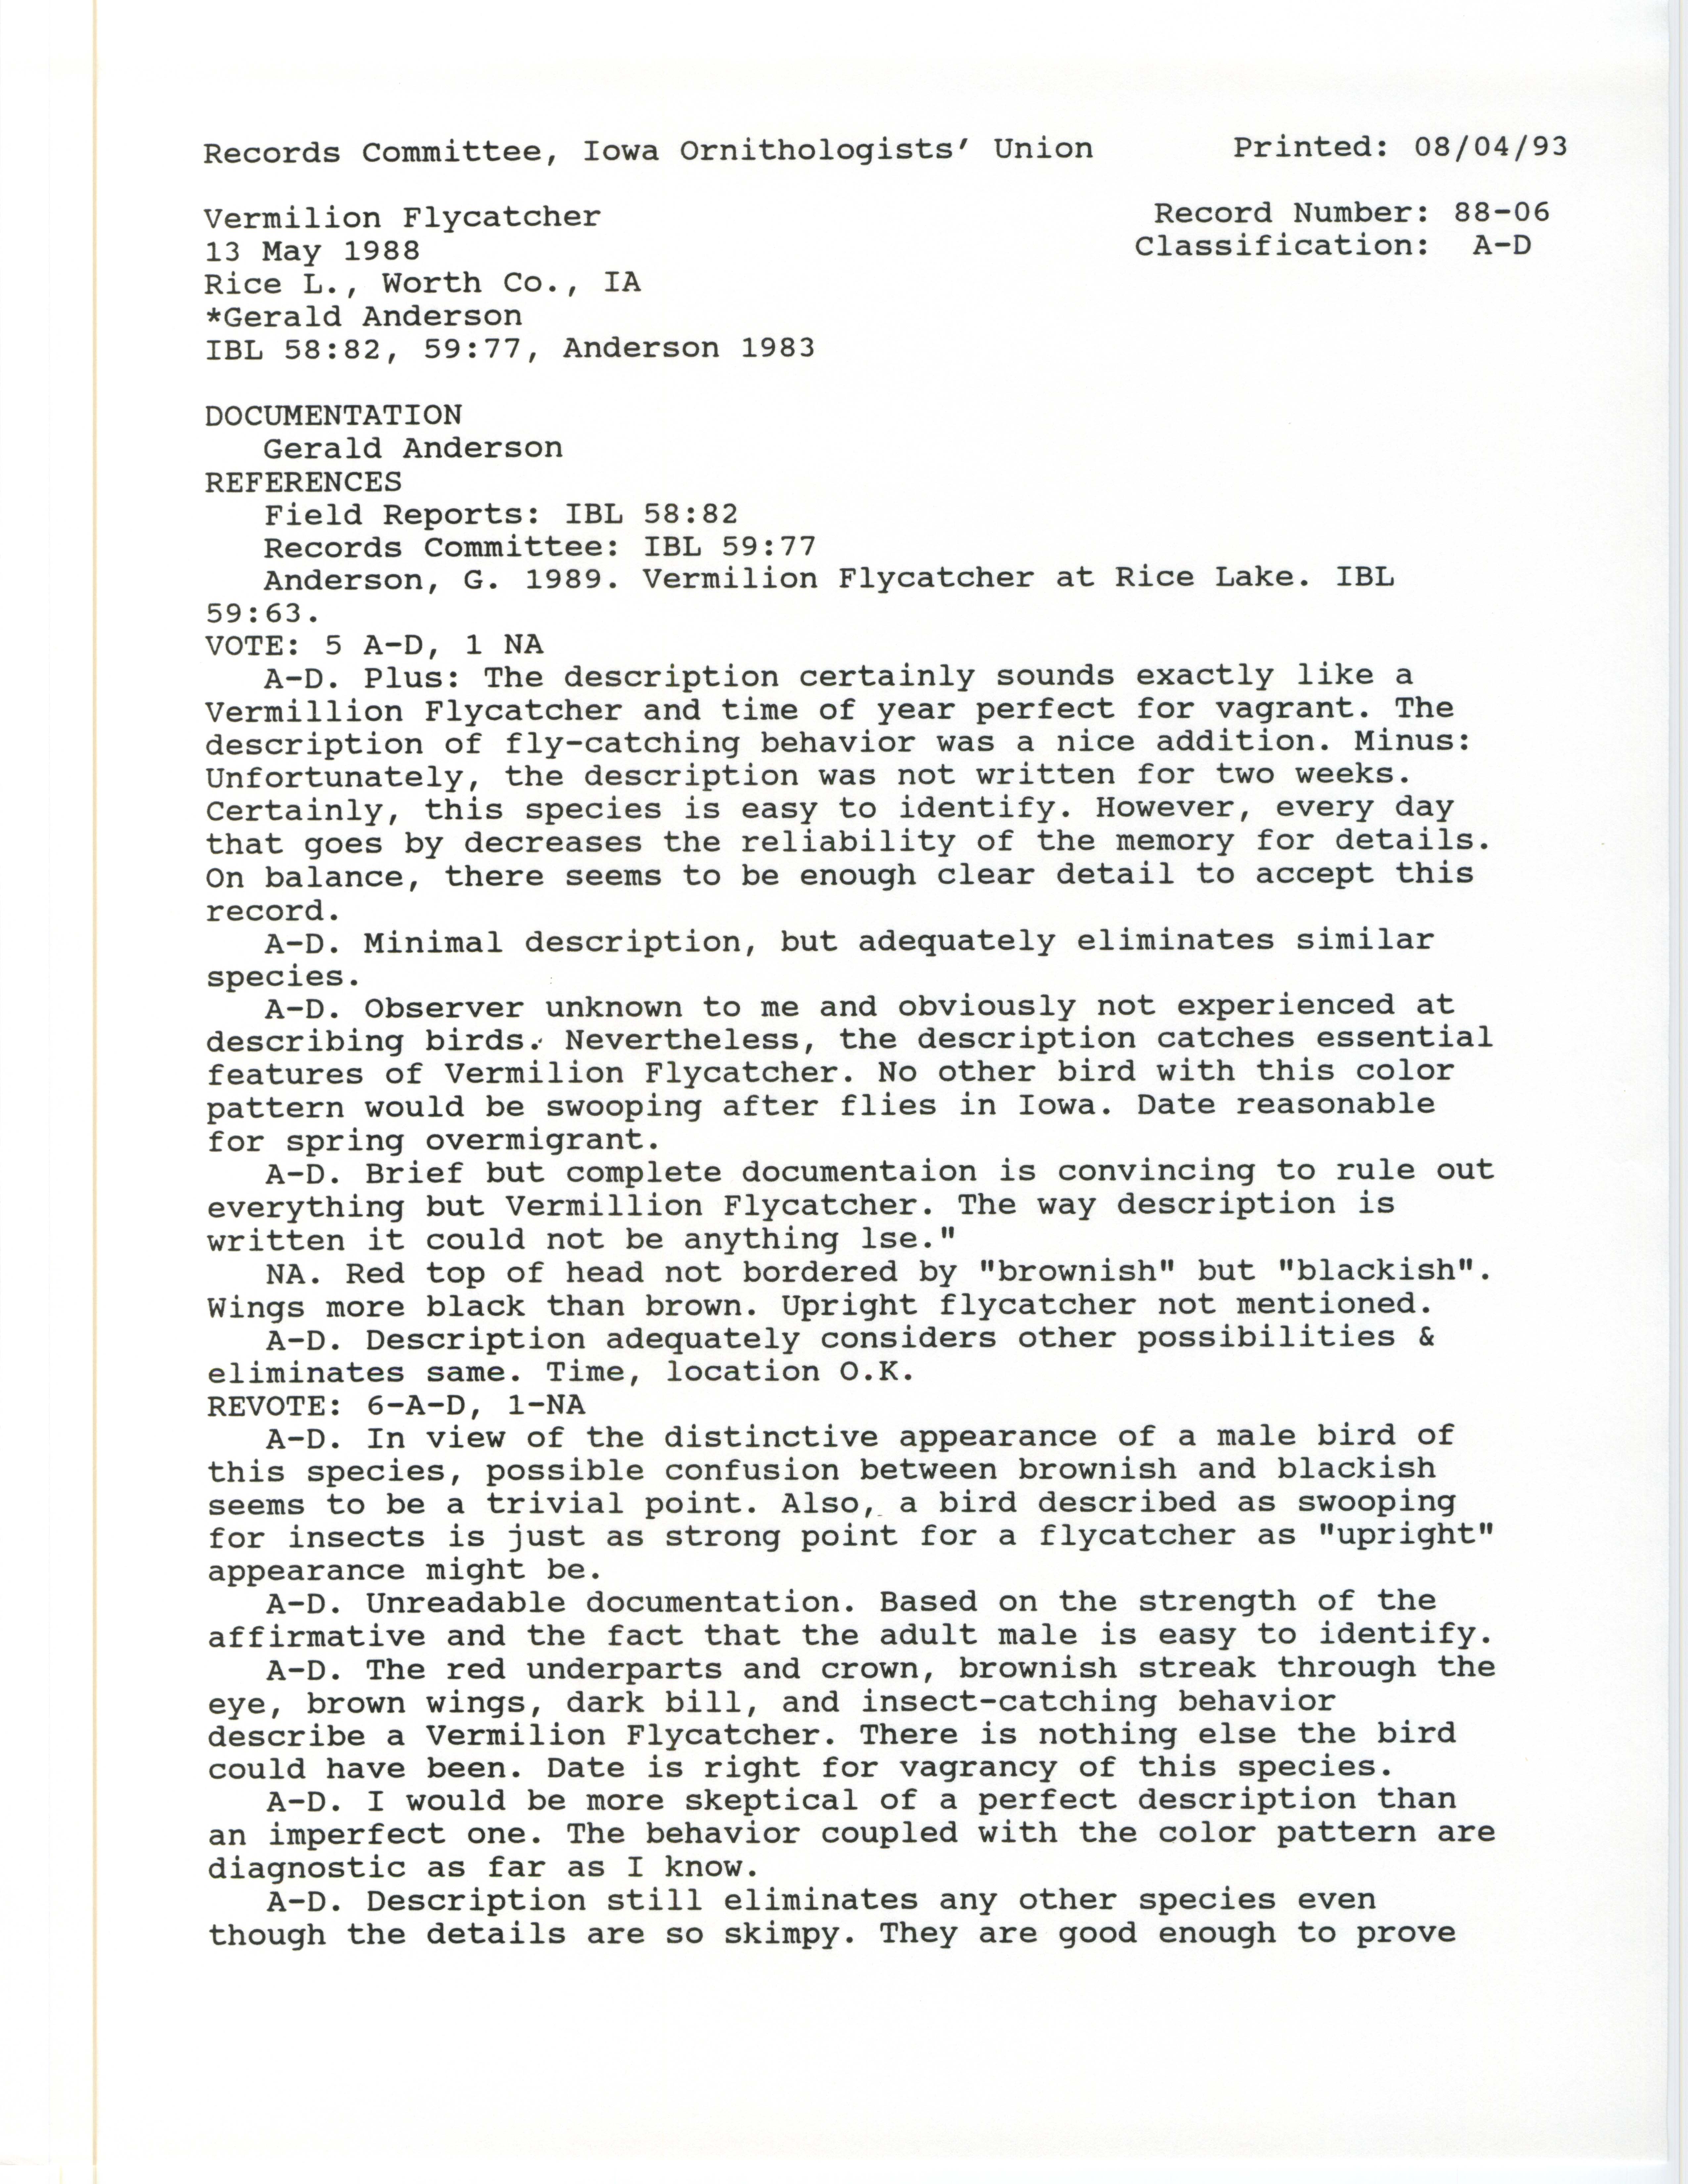 Records Committee review for rare bird sighting for Vermilion Flycatcher at Rice Lake, 1988